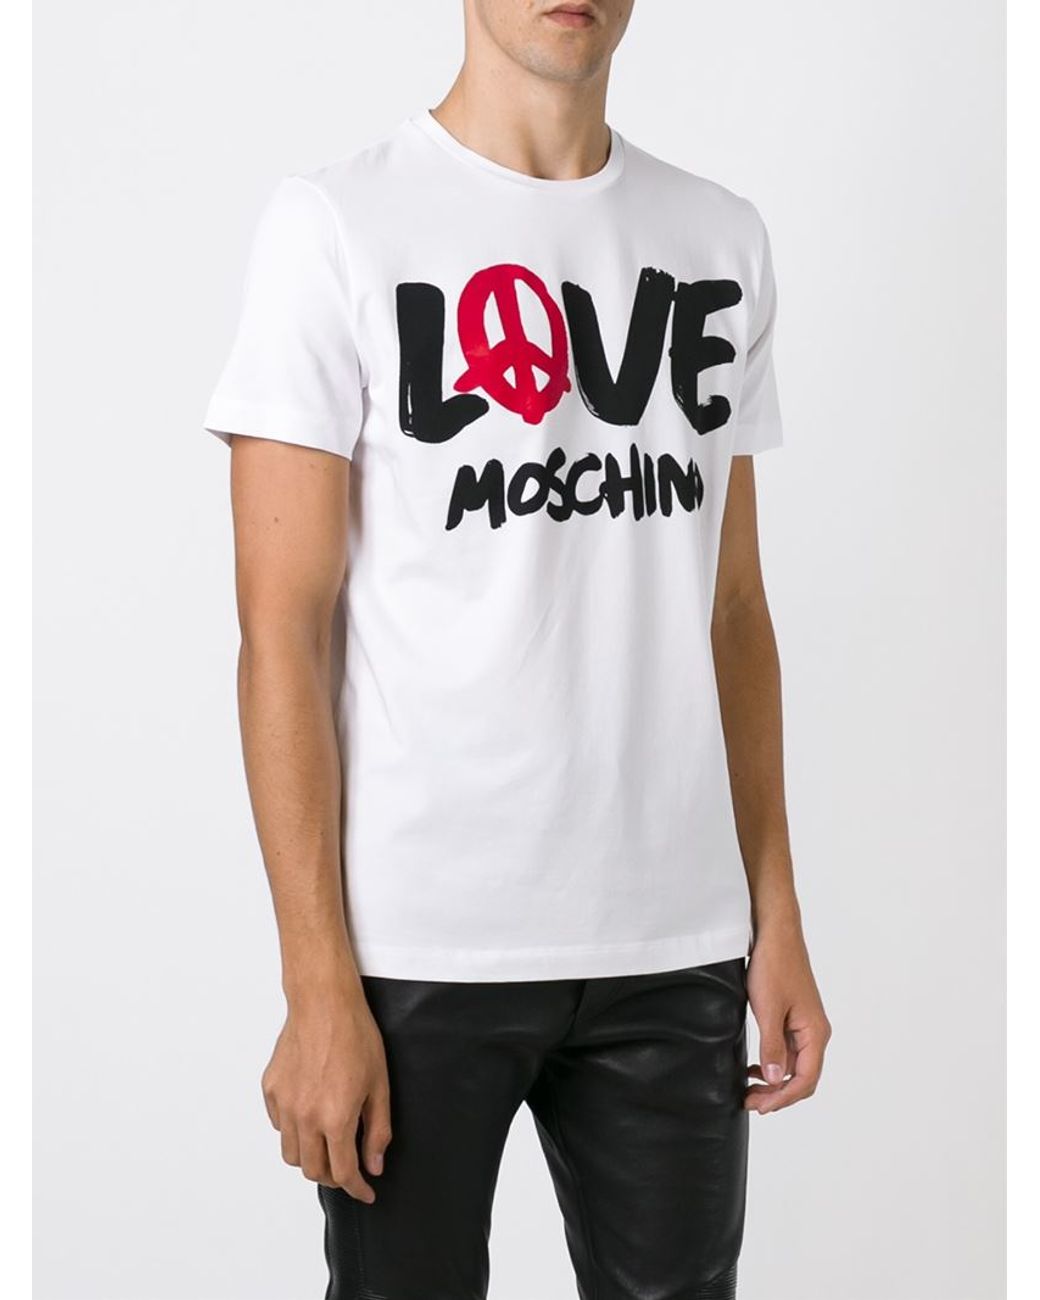 Details about   BNWT LOVE MOSCHINO FRAME LOGO EMBOSSED 3D PRINT T-SHIRT WHITE & BLACK RARE 